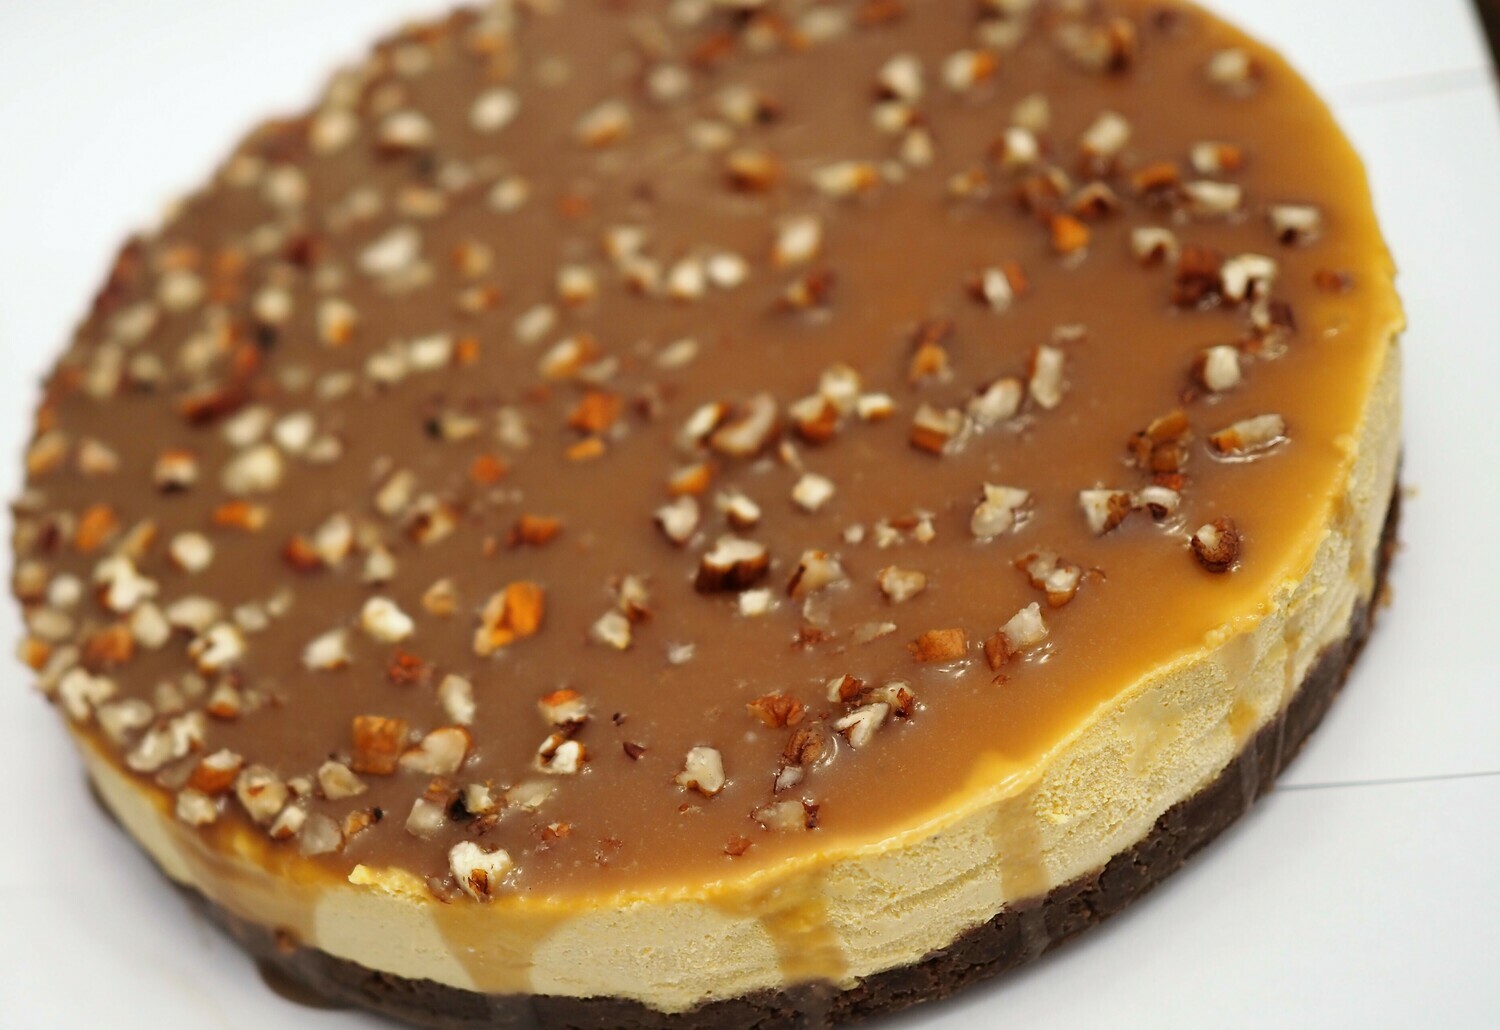 Vegan pumpkin cheesecake with caramel sauce and crushed pecans. GLUTEN FREE available.